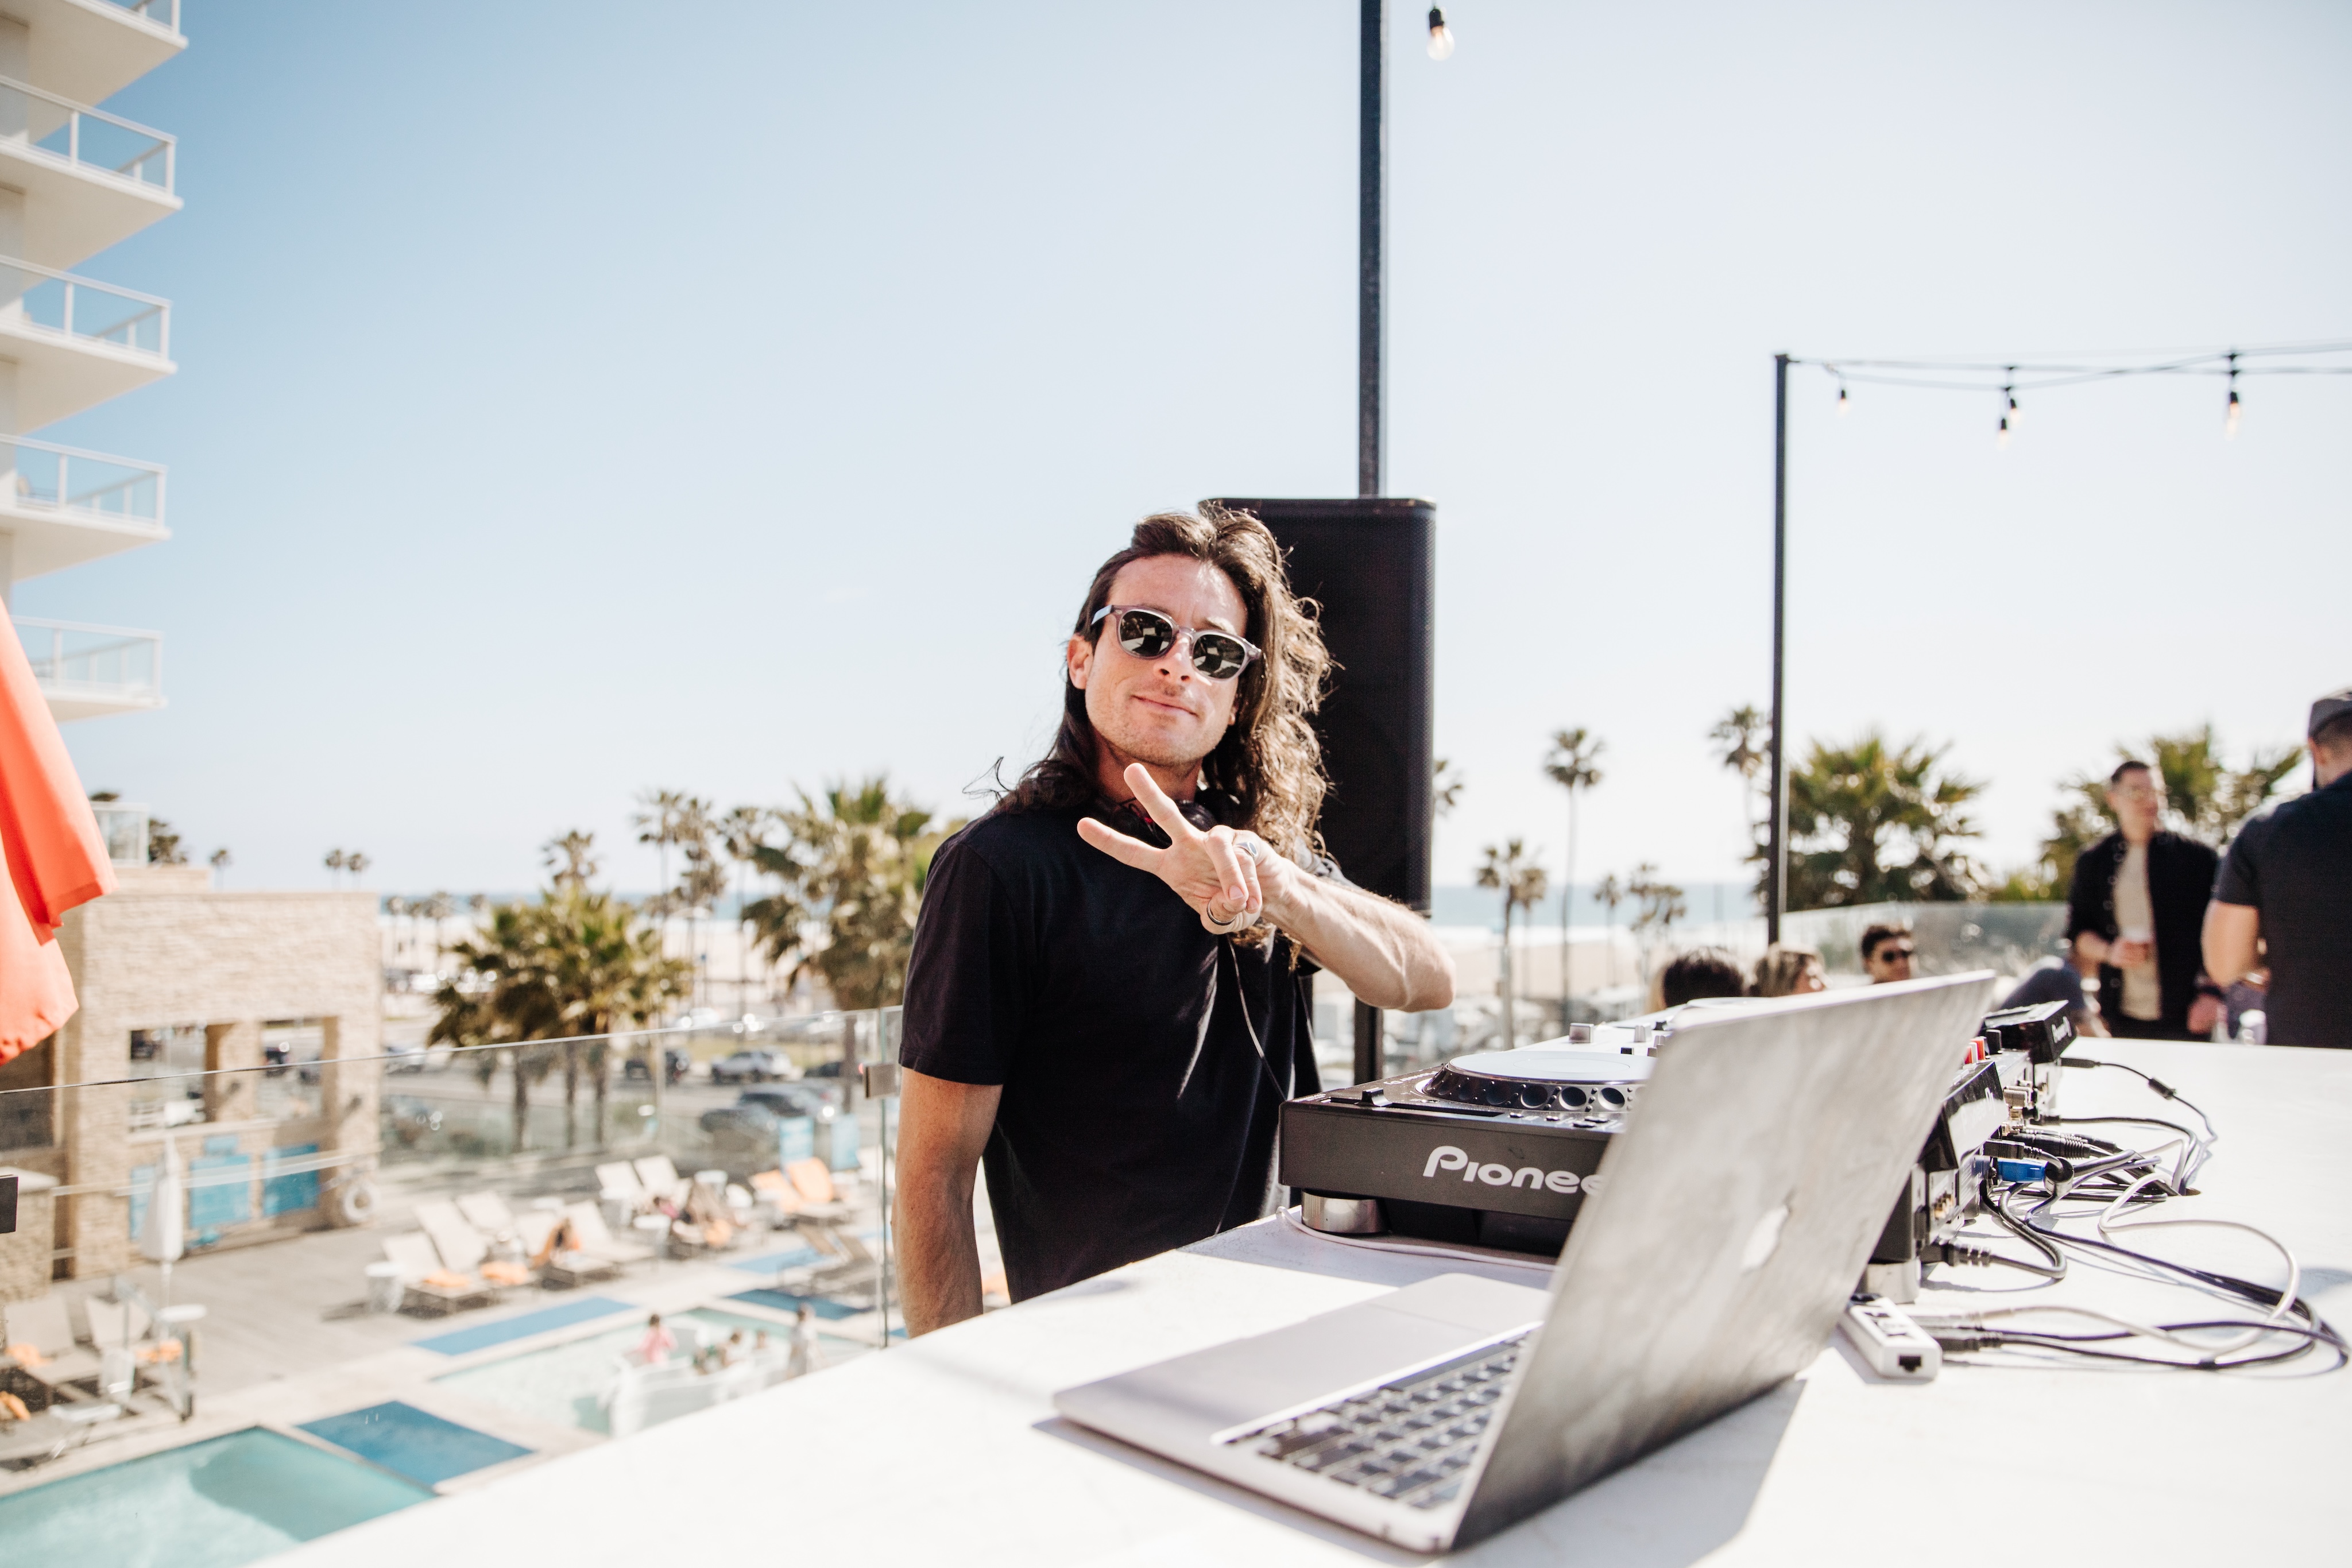 A DJ wearing sunglasses and a black shirt makes a peace sign while mixing music outdoors by a pool, delivering top-notch DJ entertainment at Treehouse on PCH.